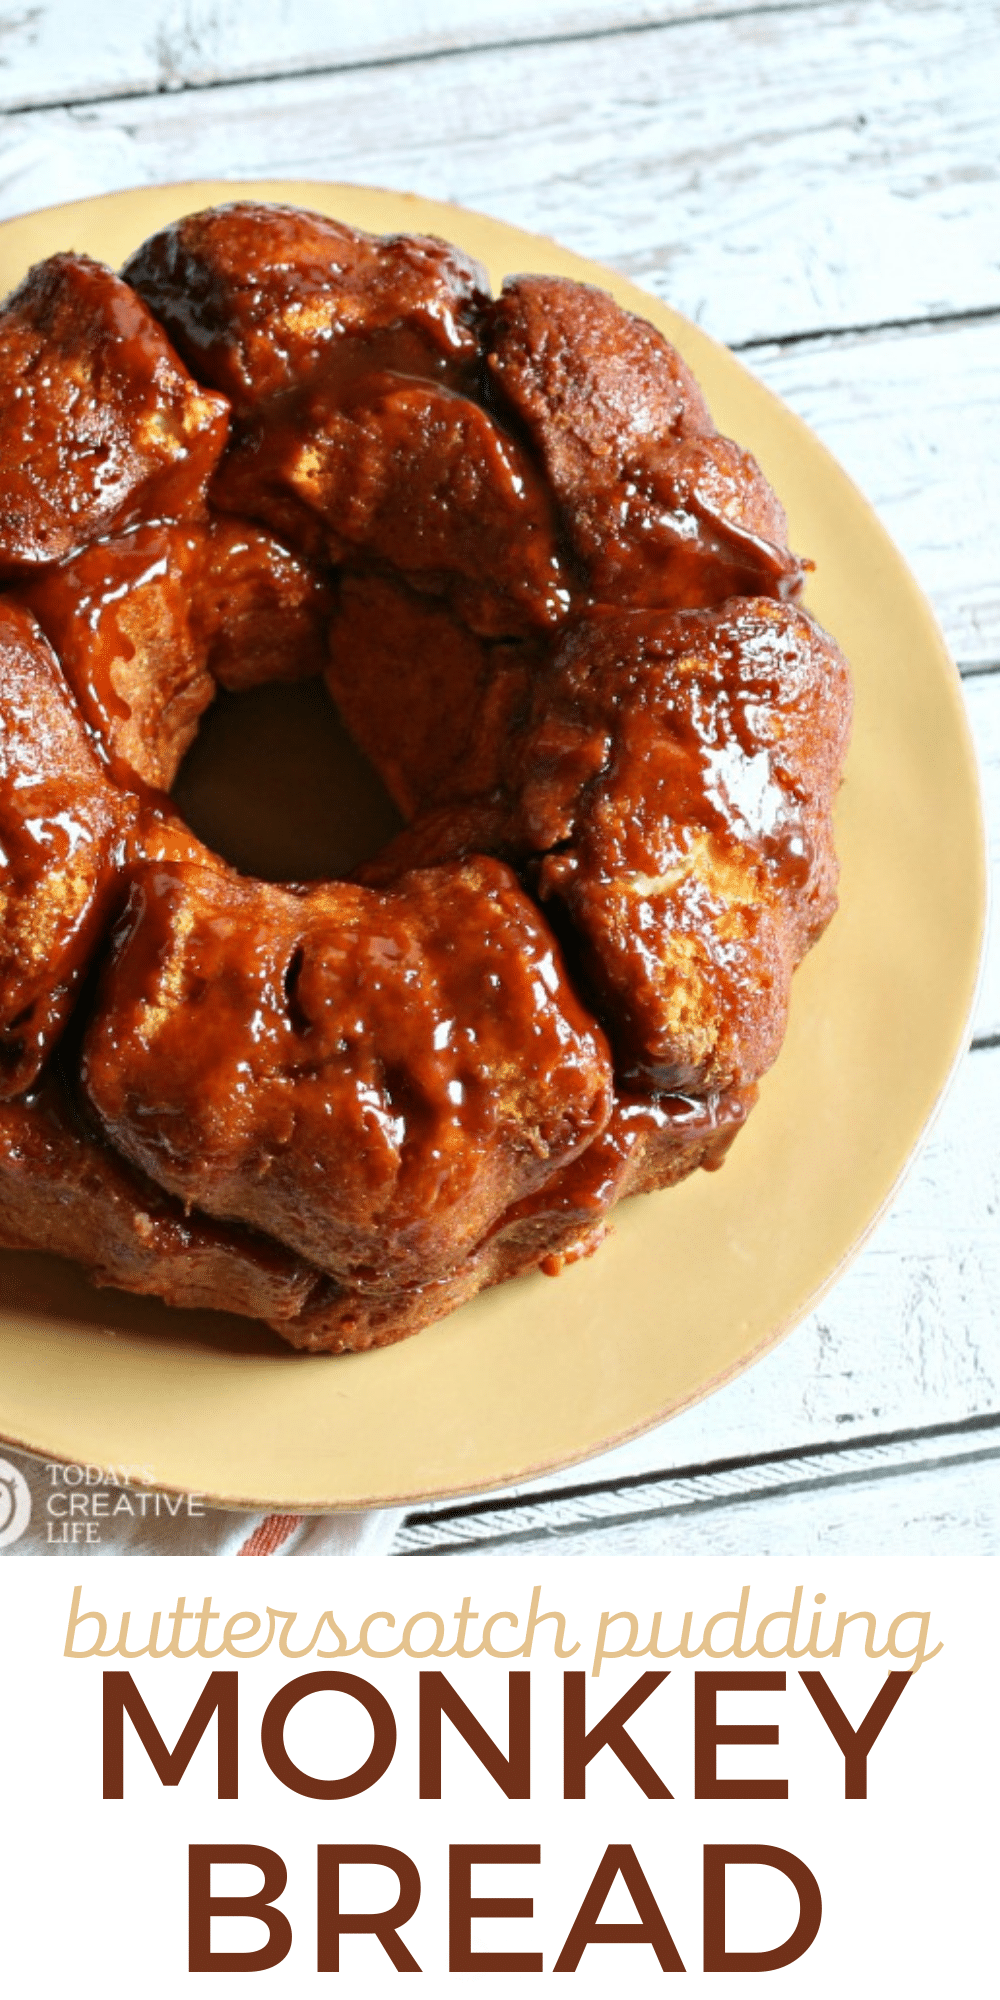 Butterscotch Pudding Monkey Bread Recipe - Today&amp;#39;s Creative Life